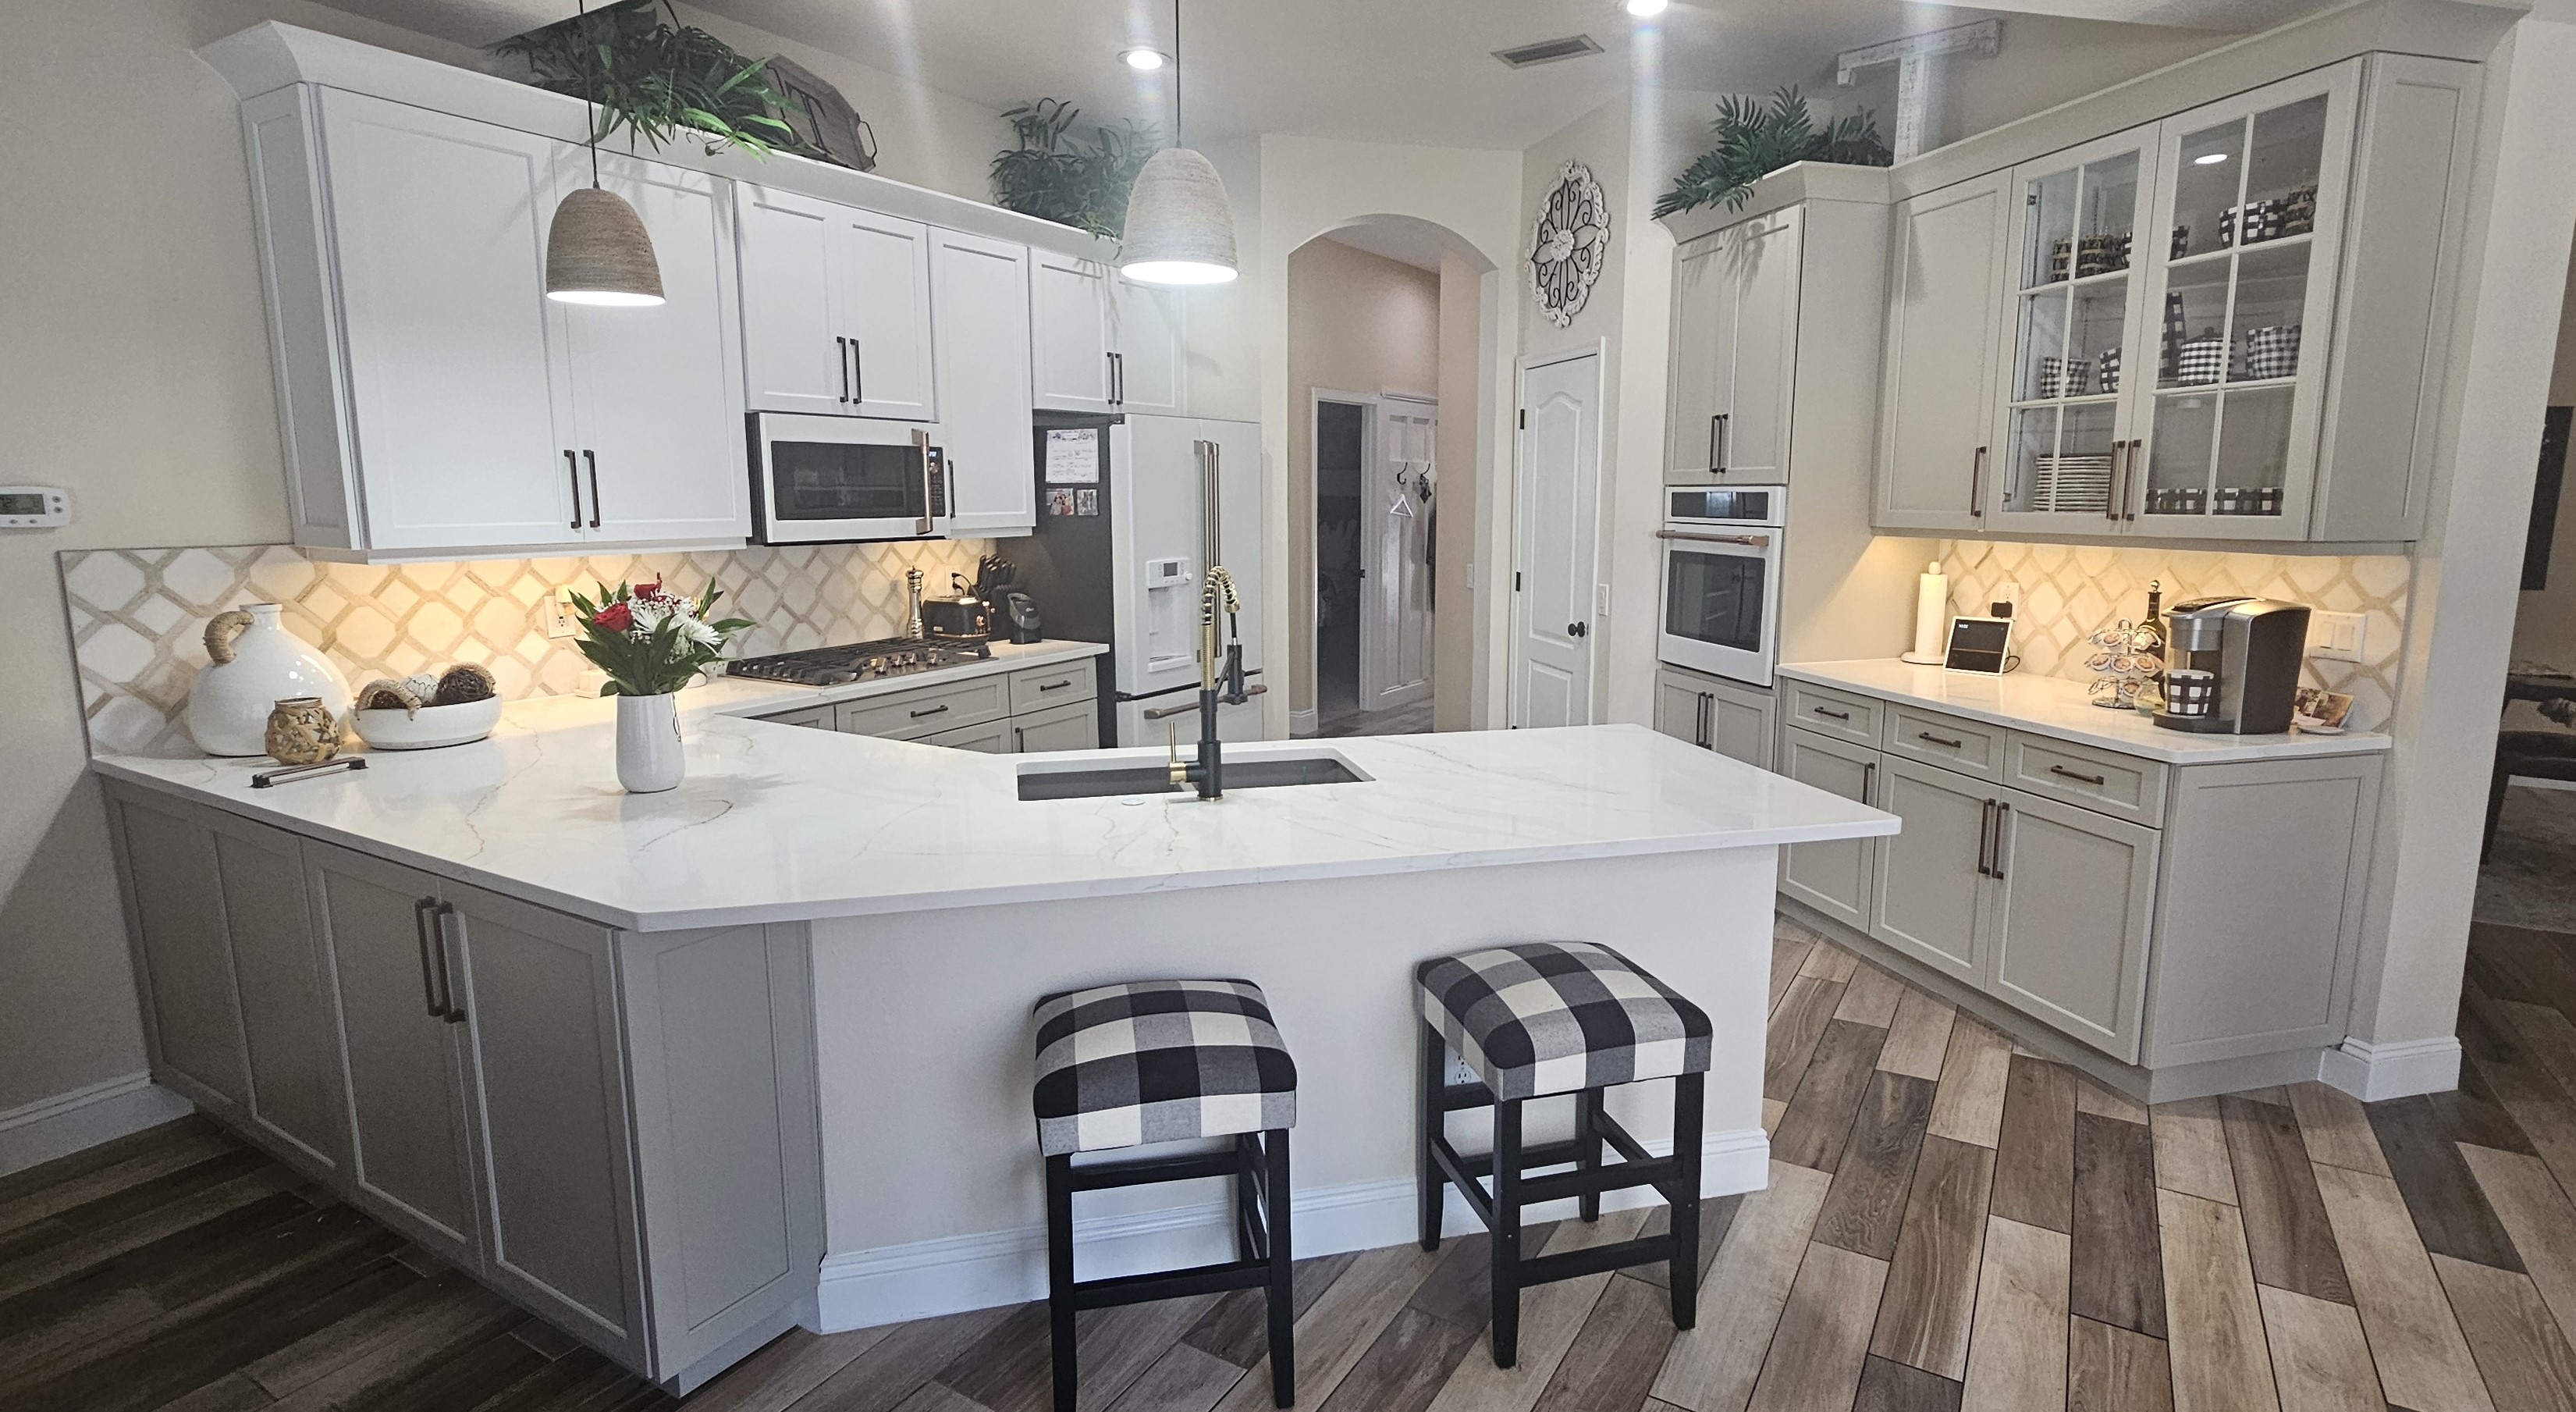 Modern appliances with a high-quality finish, granite worktops, and sleek white kitchen cabinets in Indian Rocks.